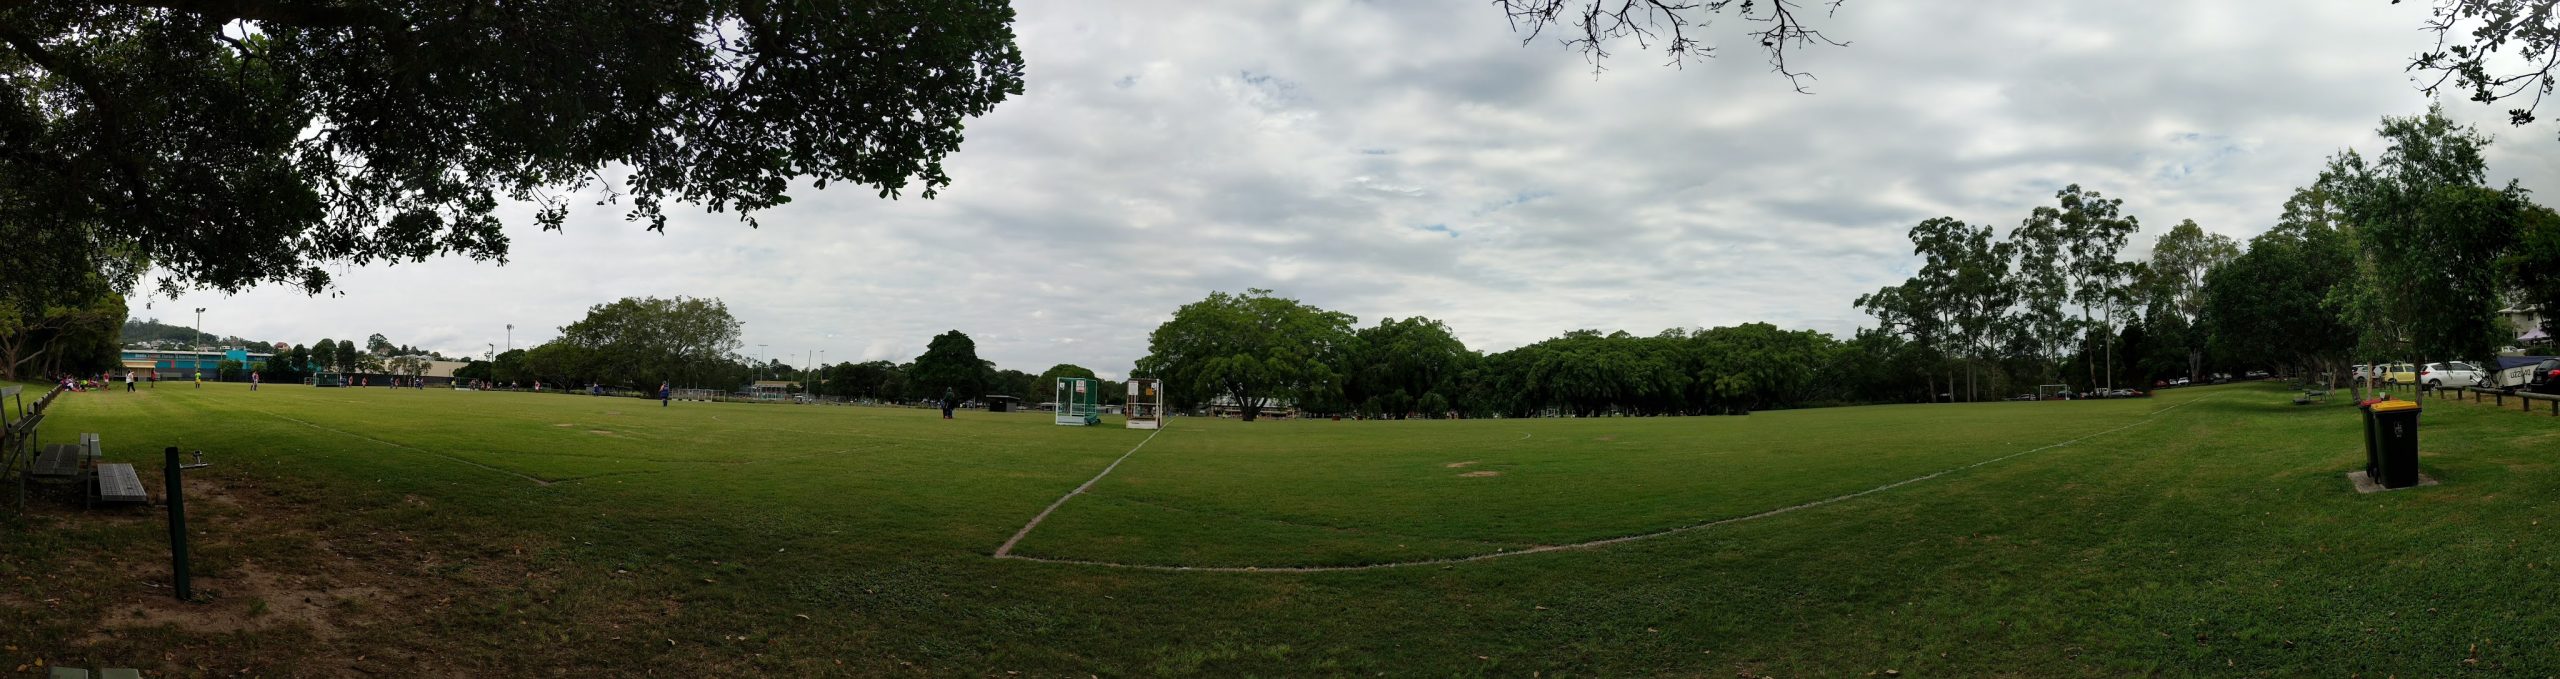 A panorama of a field with trees overhanging. People in uniform playing hockey to the left, and a pair of trash and recyling bins to the right.